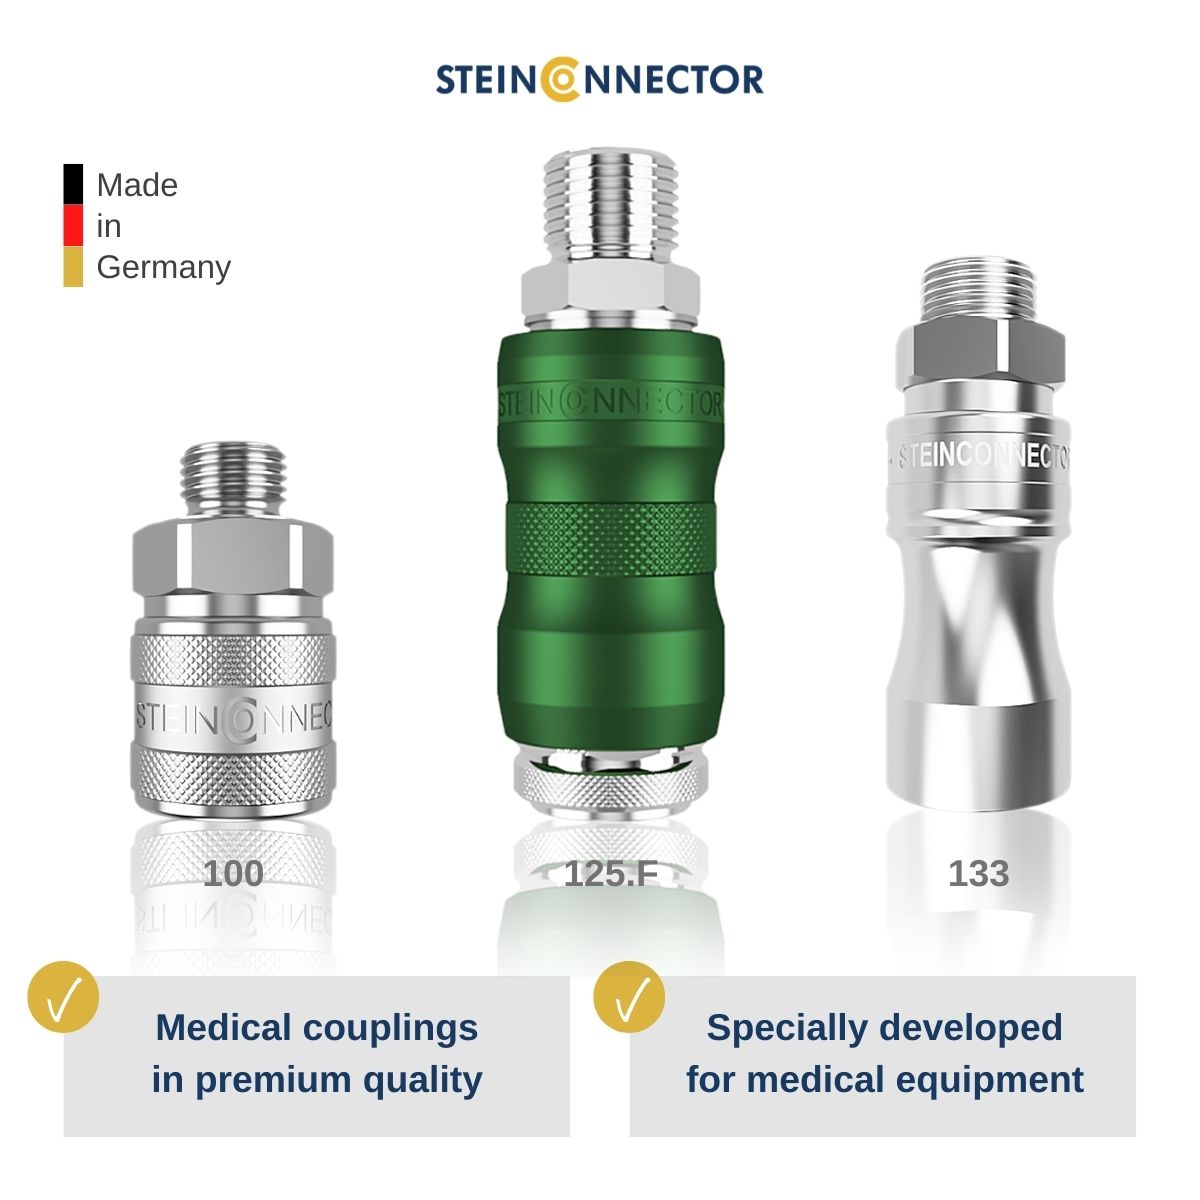 Steinconnector - manufacturer of safety couplings & quick couplings specially designed for medical devices - Premium Quality Made in Germany - Medical couplings & NIST couplings for medical devices 